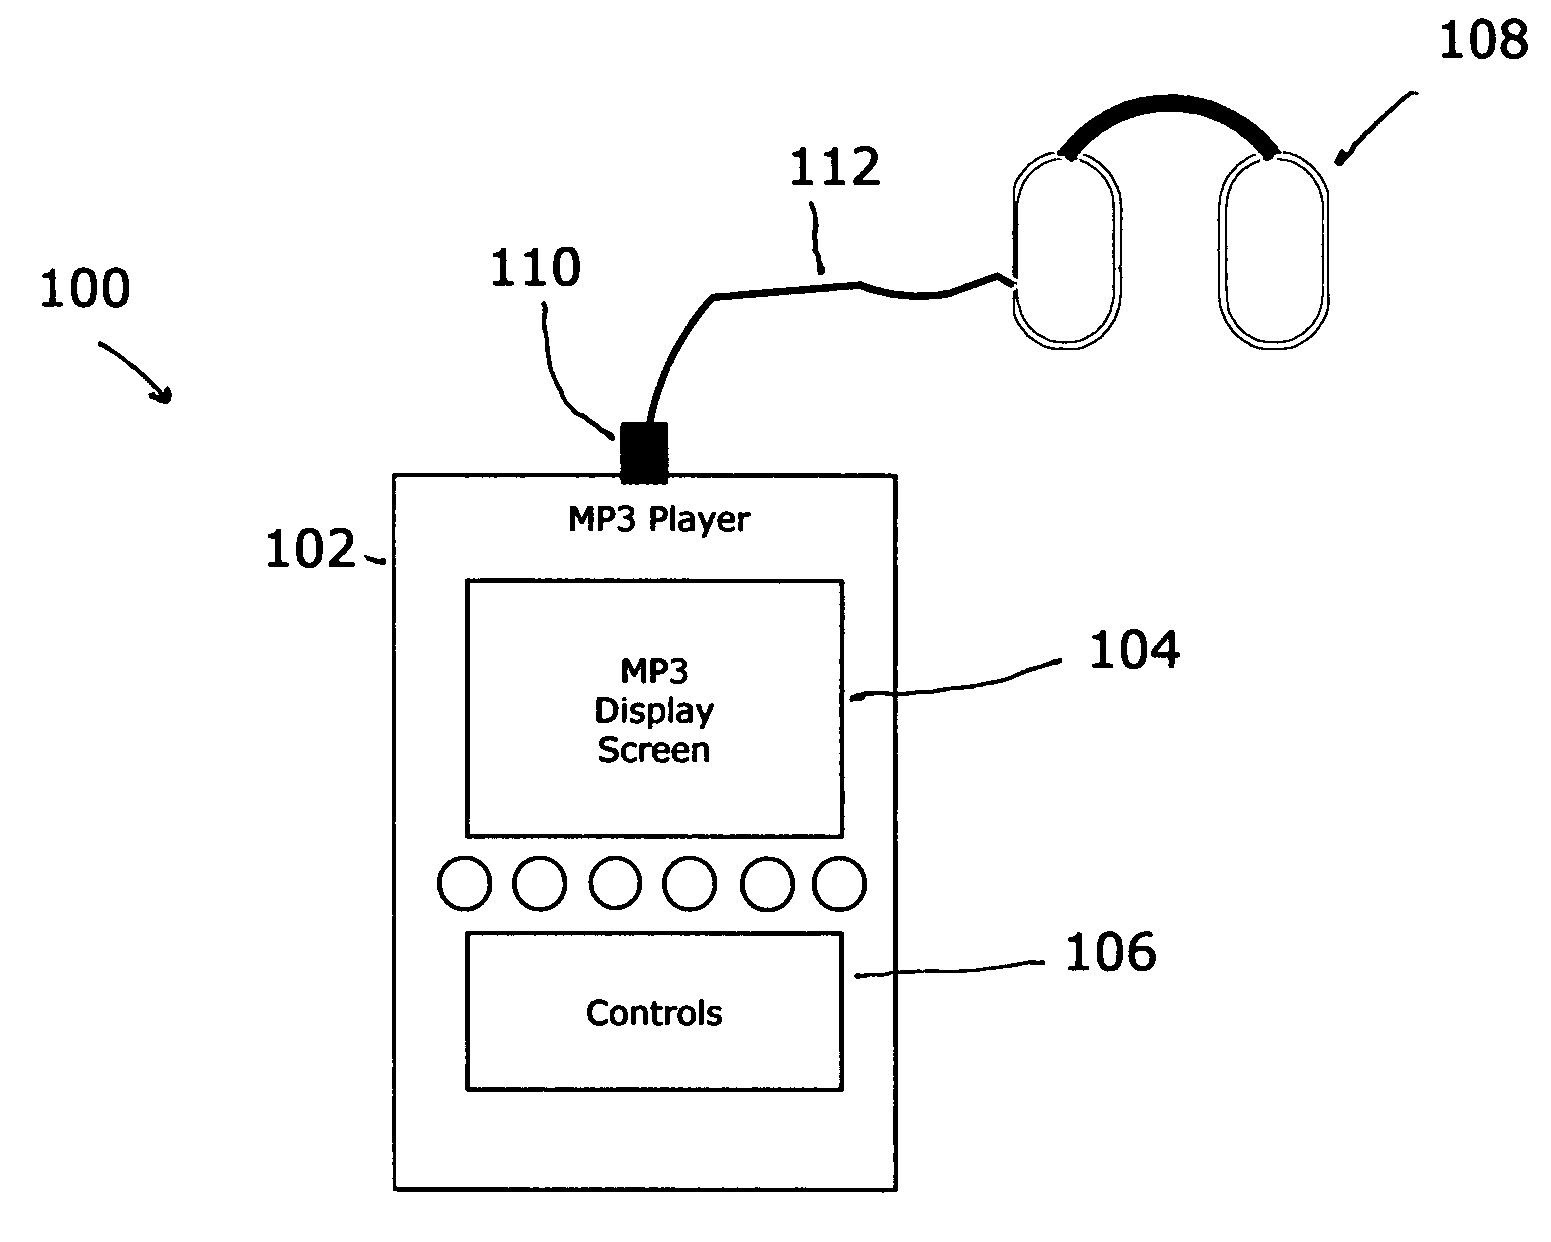 Flexible meter music system and method